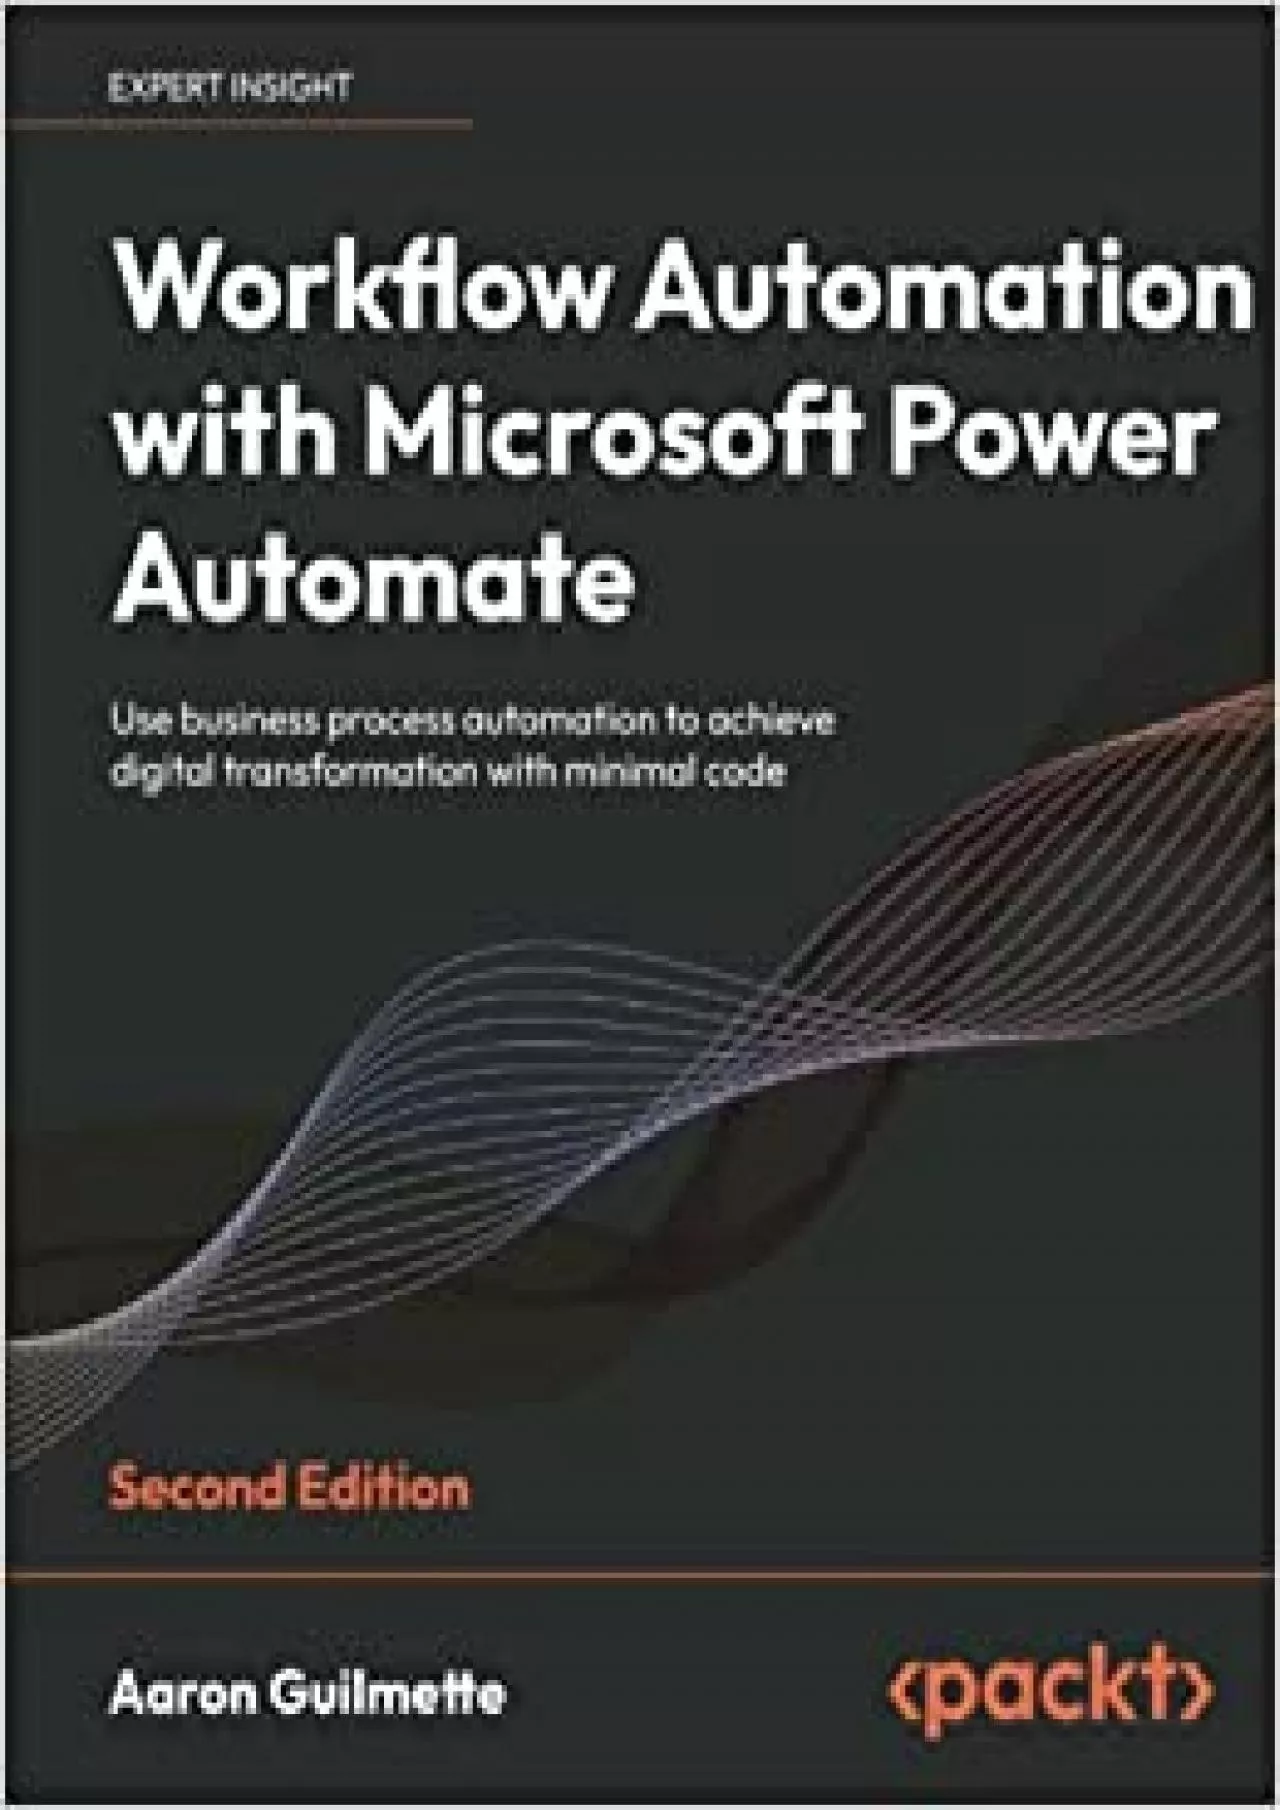 Workflow Automation with Microsoft Power Automate: Use business process automation to